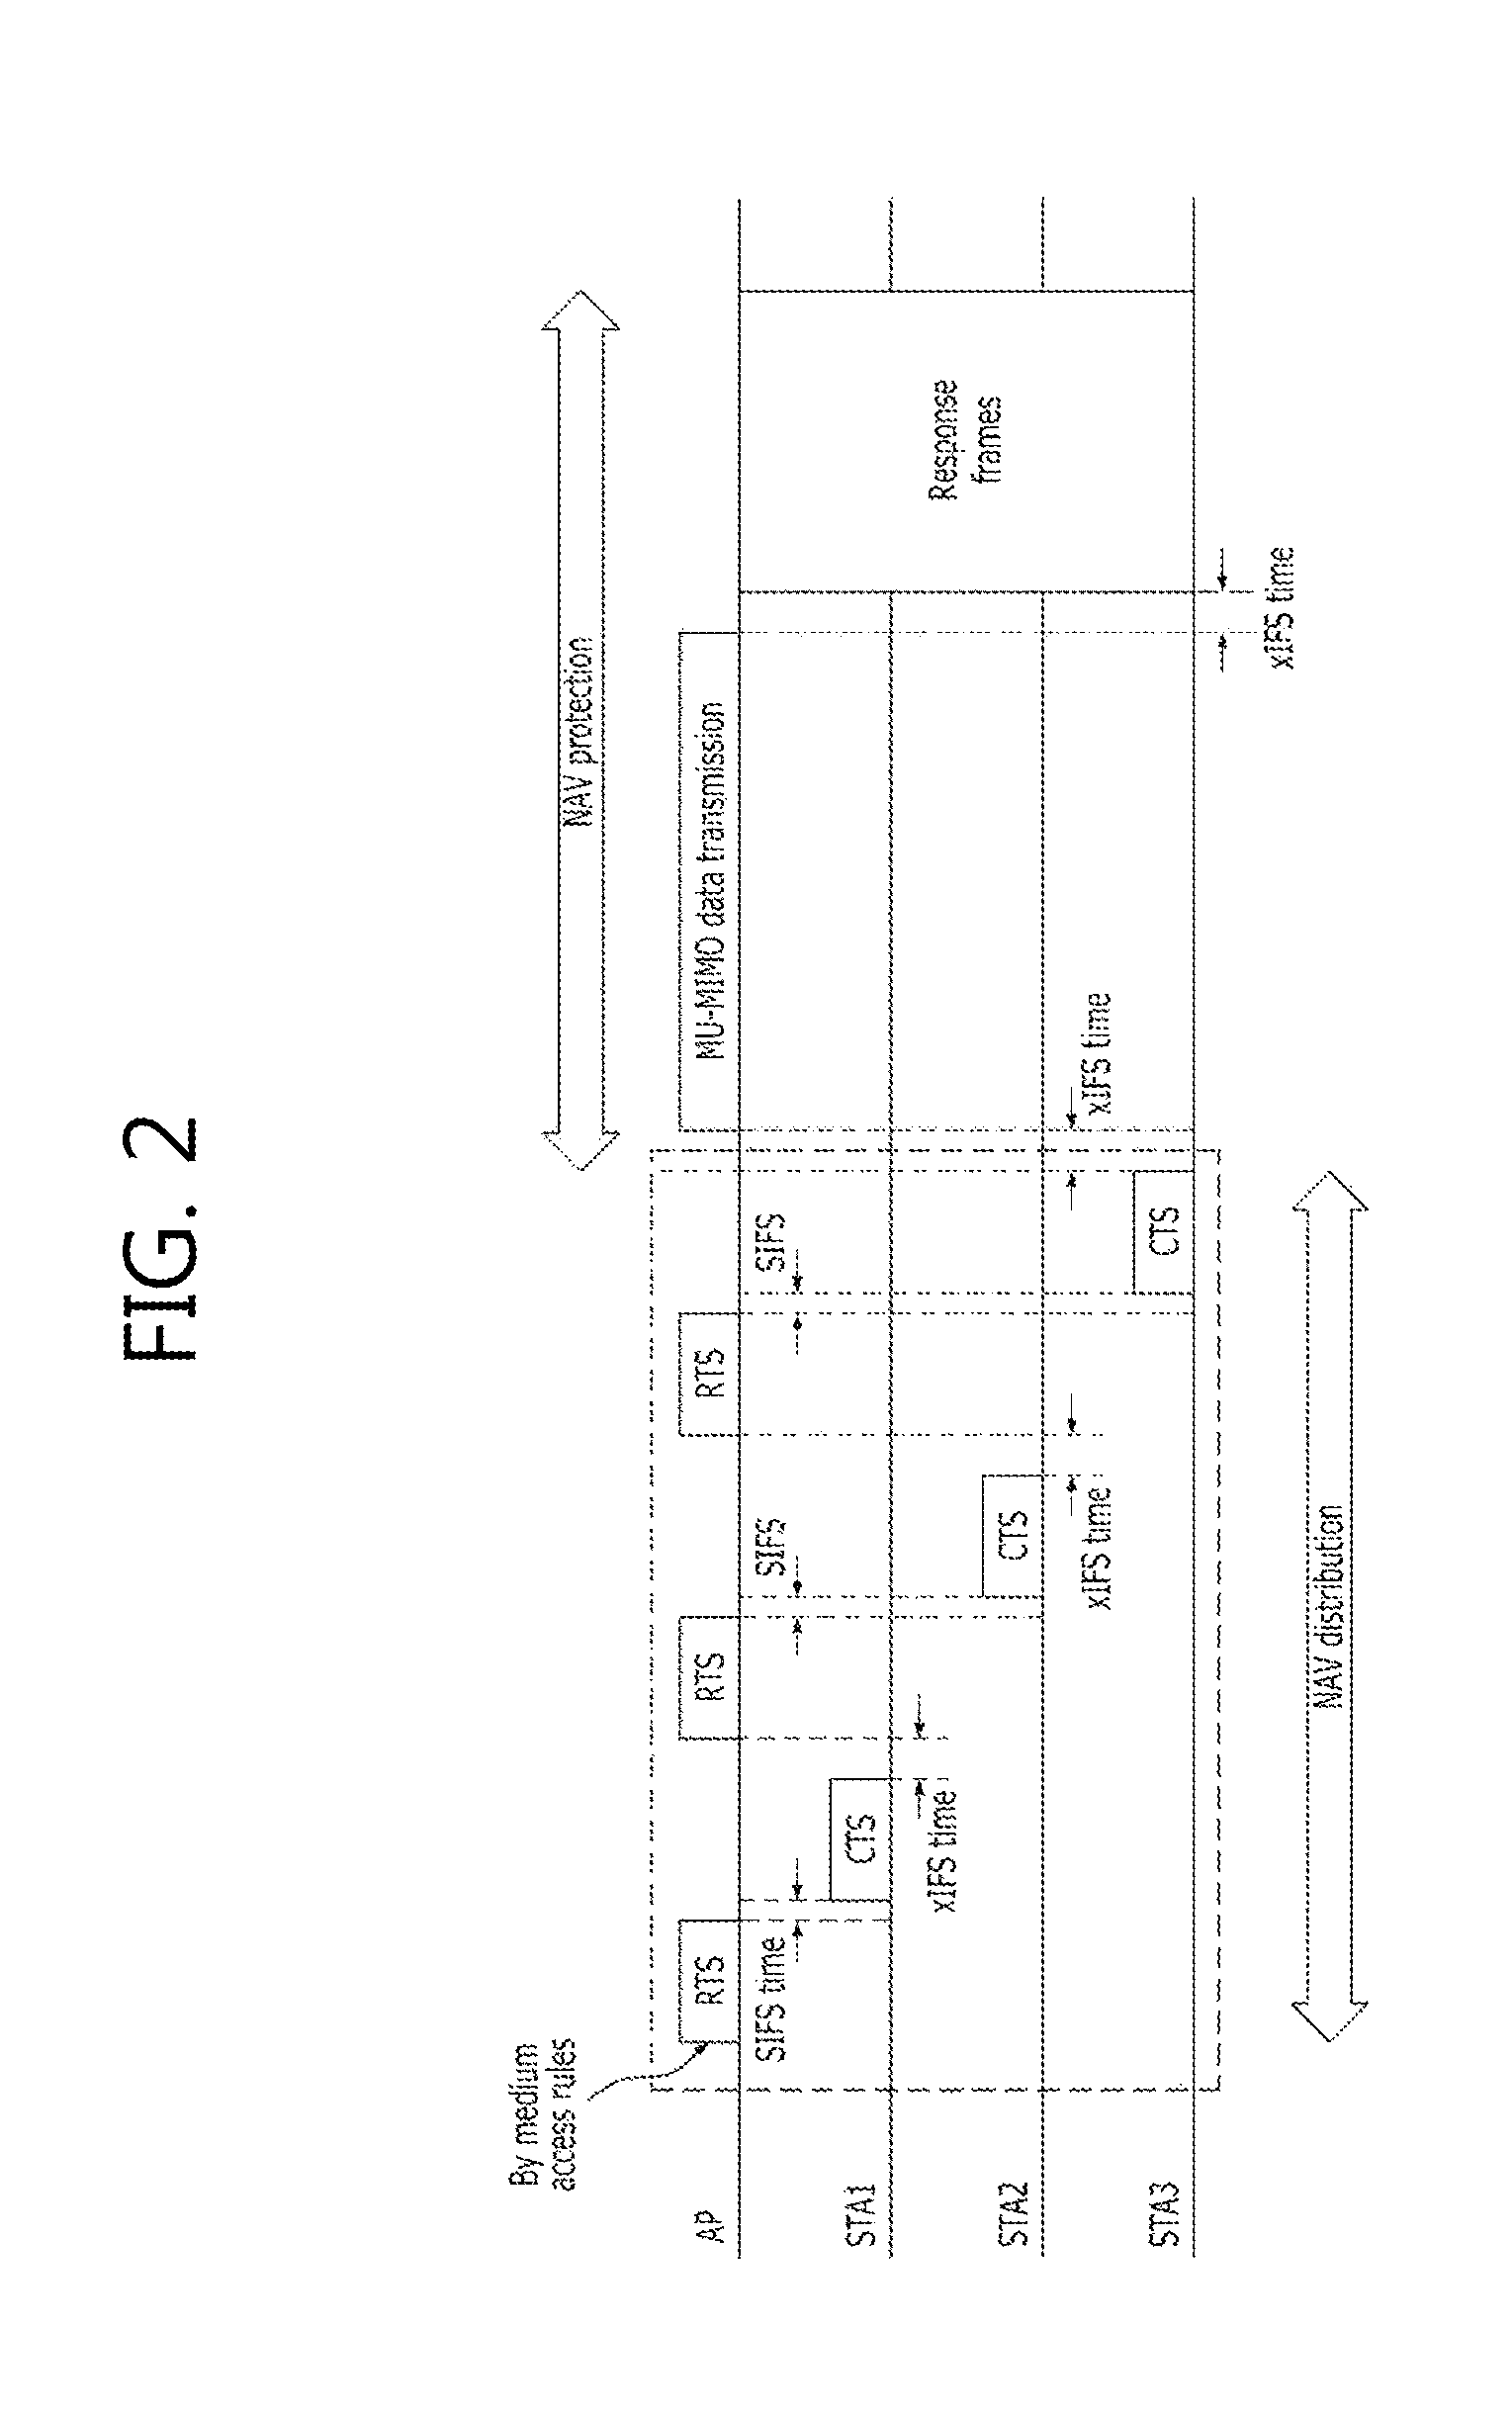 Method for protecting data in a MU-MIMO based wireless communication system